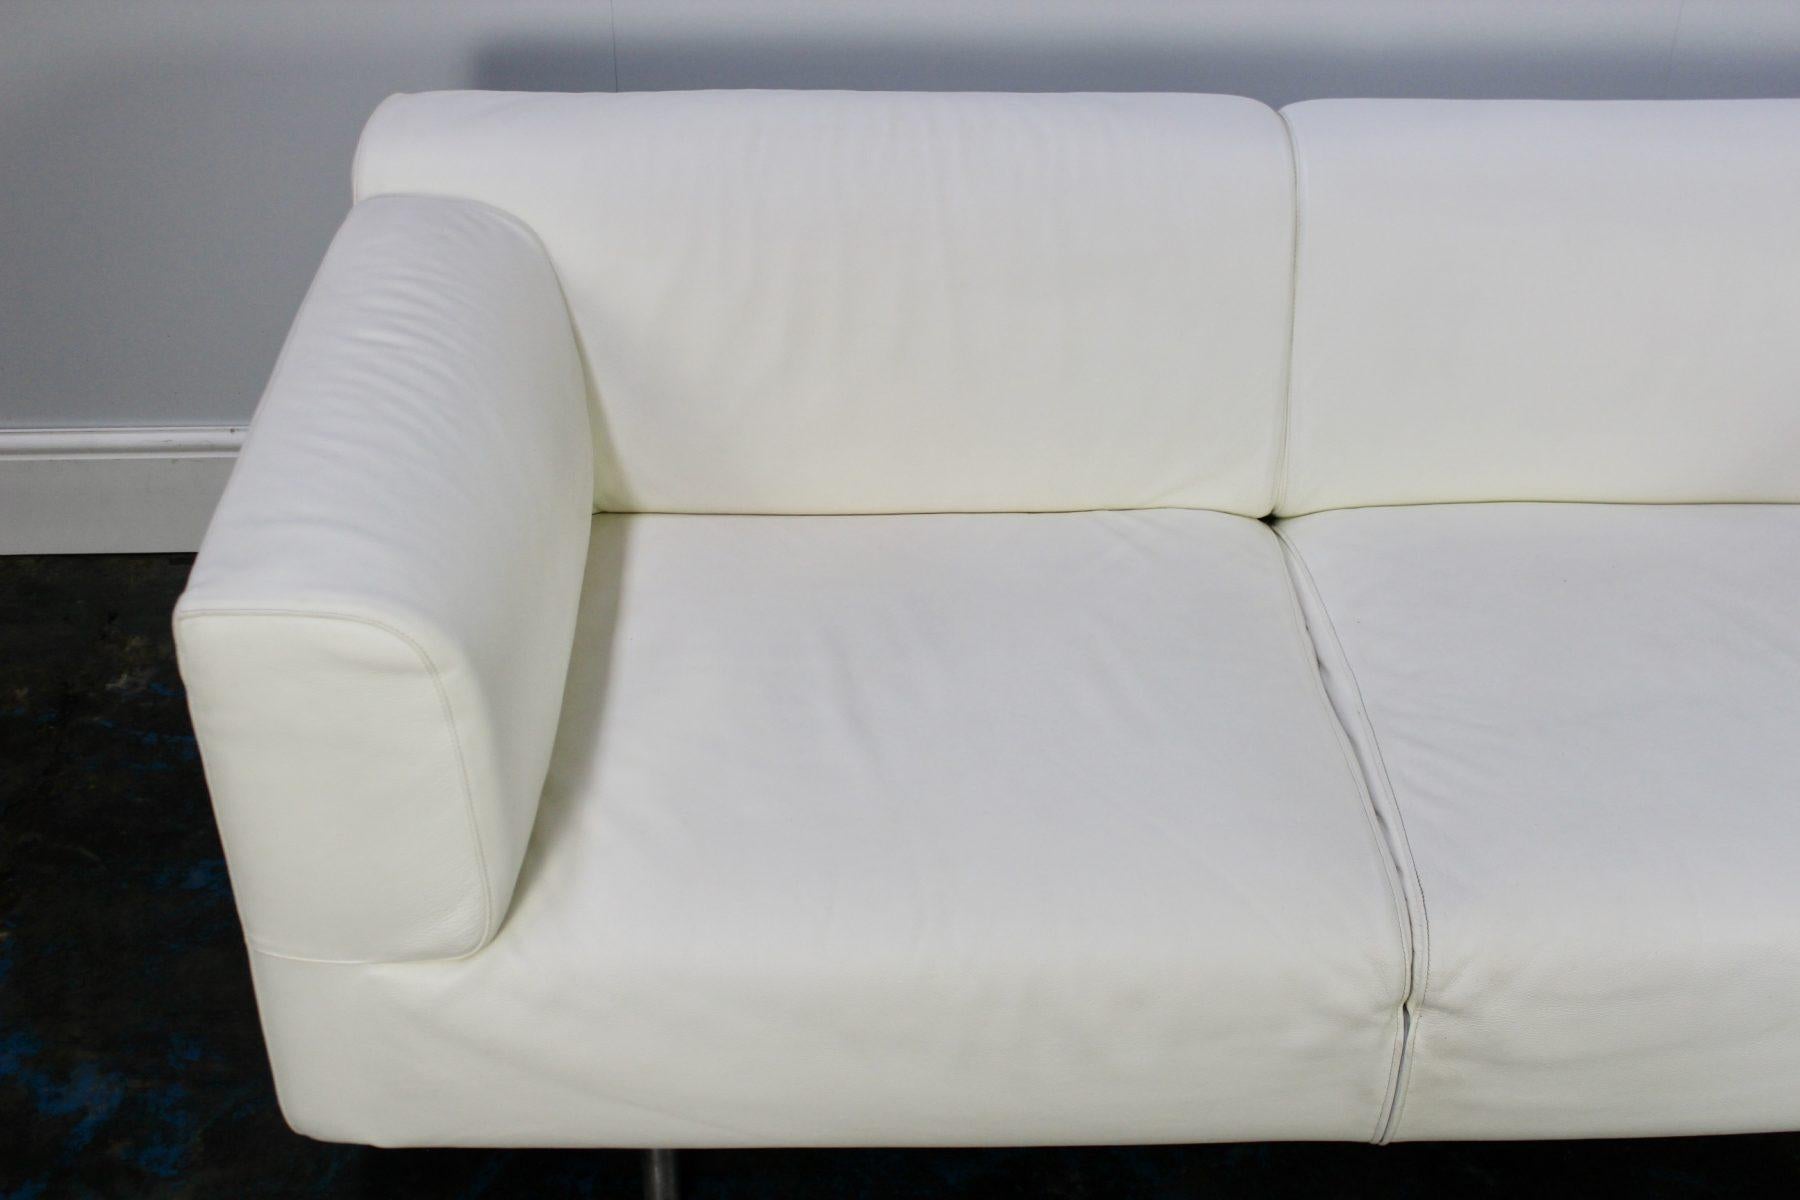 Cassina “250 Met” Large 2-Seat Sofa in Chalk White Leather For Sale 4